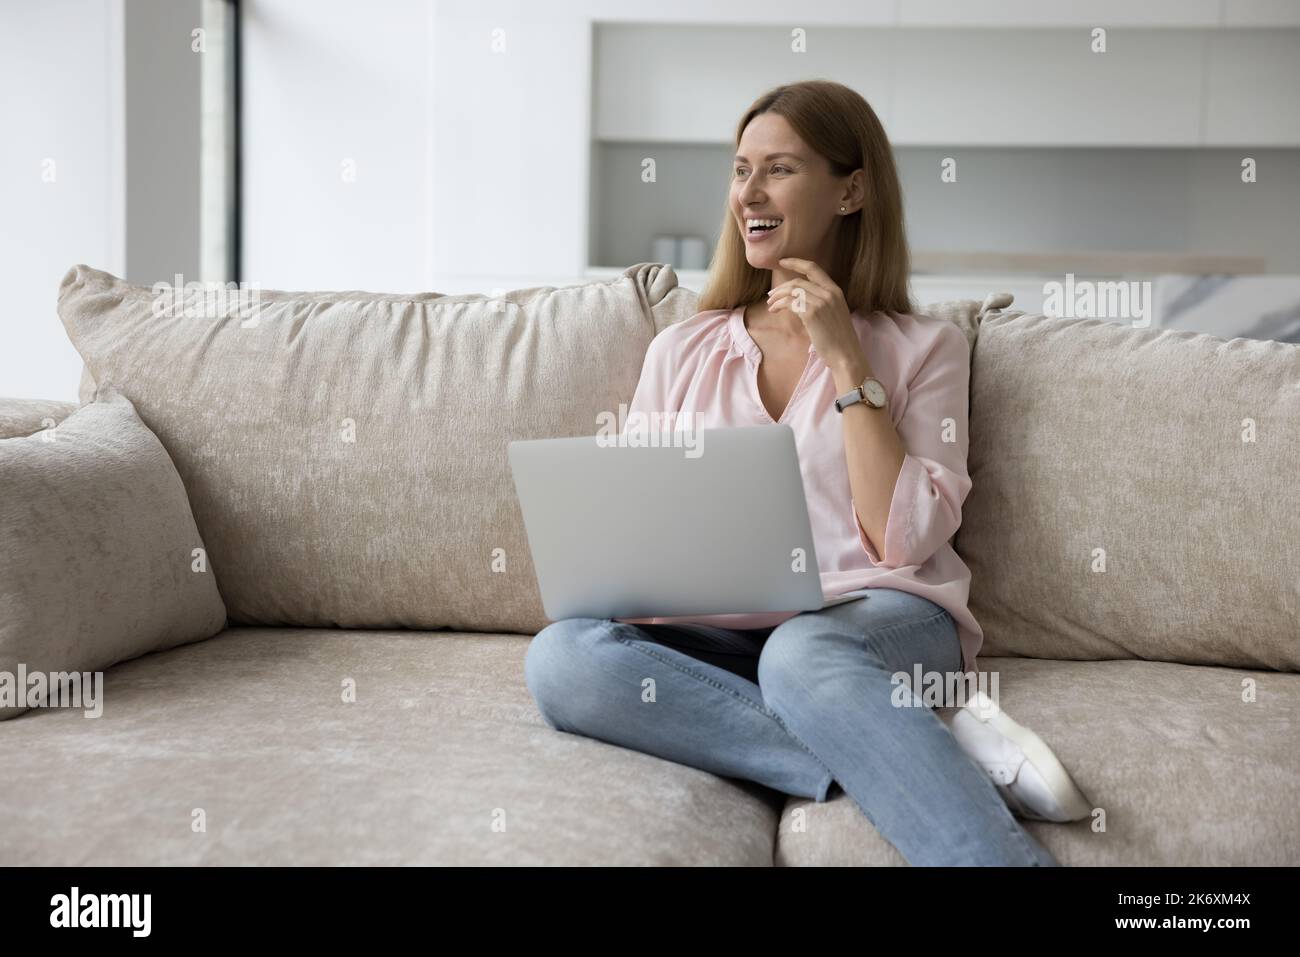 Dreamy woman staring into distance relaxing on sofa with laptop Stock Photo